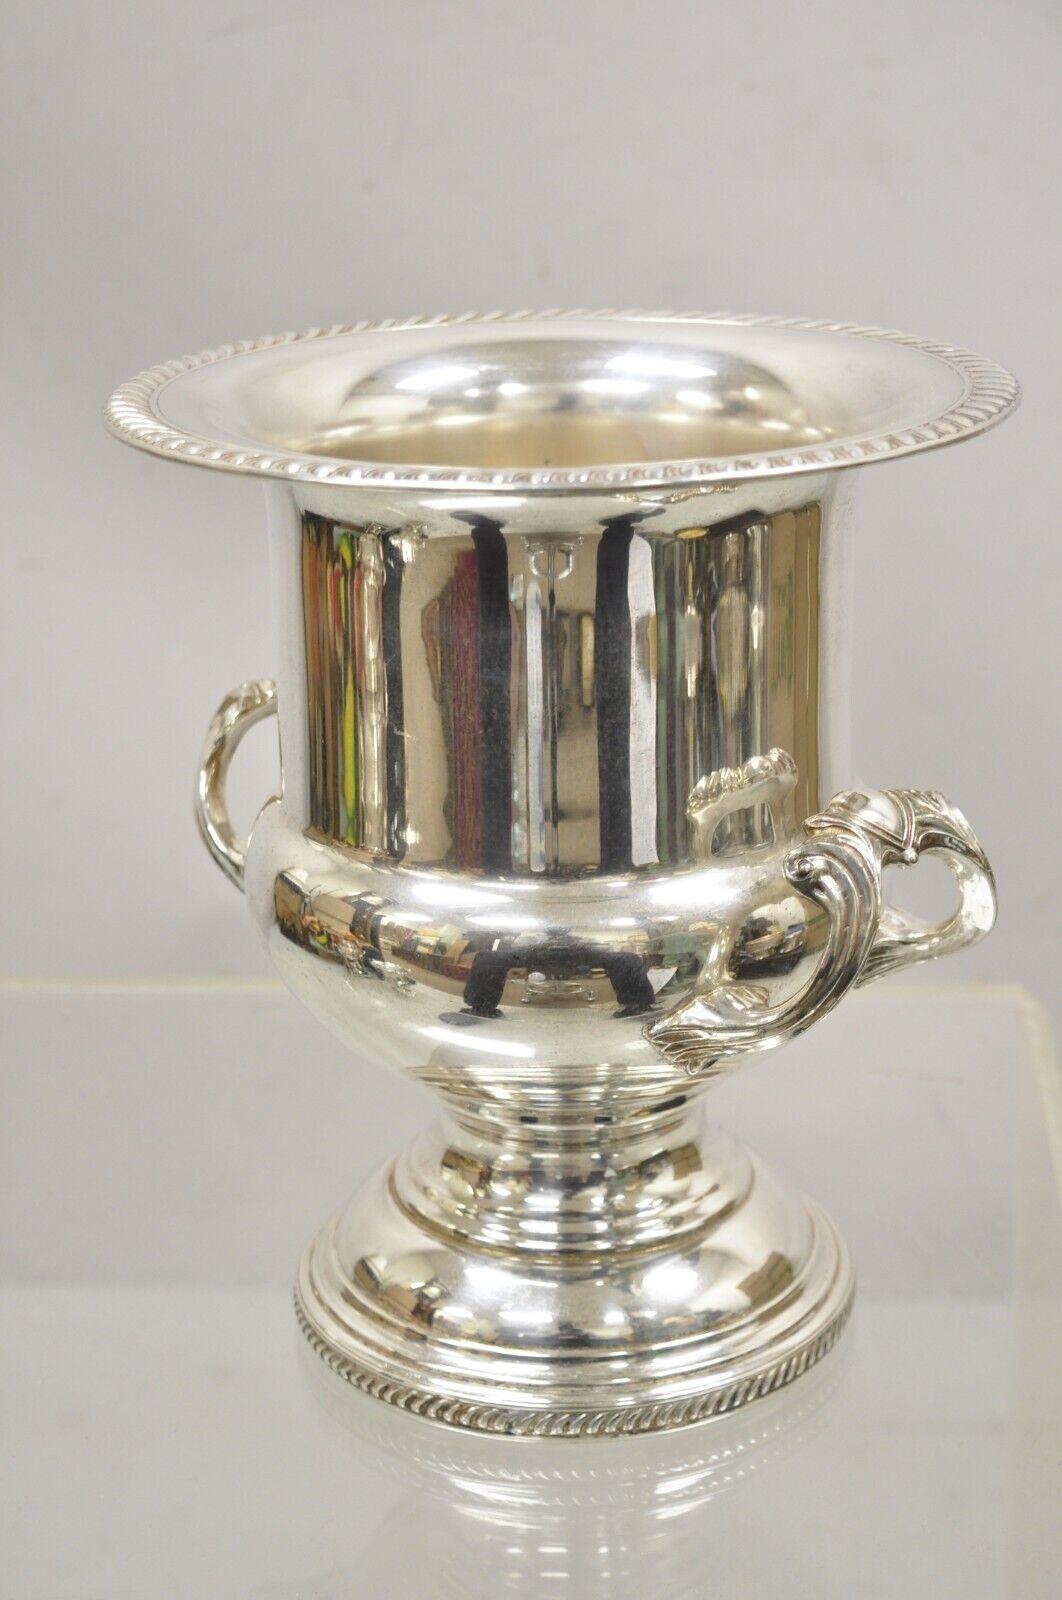 Regency Style Silver Plated Twin Handle Champagne Wine Chiller Ice Bucket. Item features ornate twin handles, decorated rim, great style and form. Circa Mid to Late 20th Century. Measurements: 10